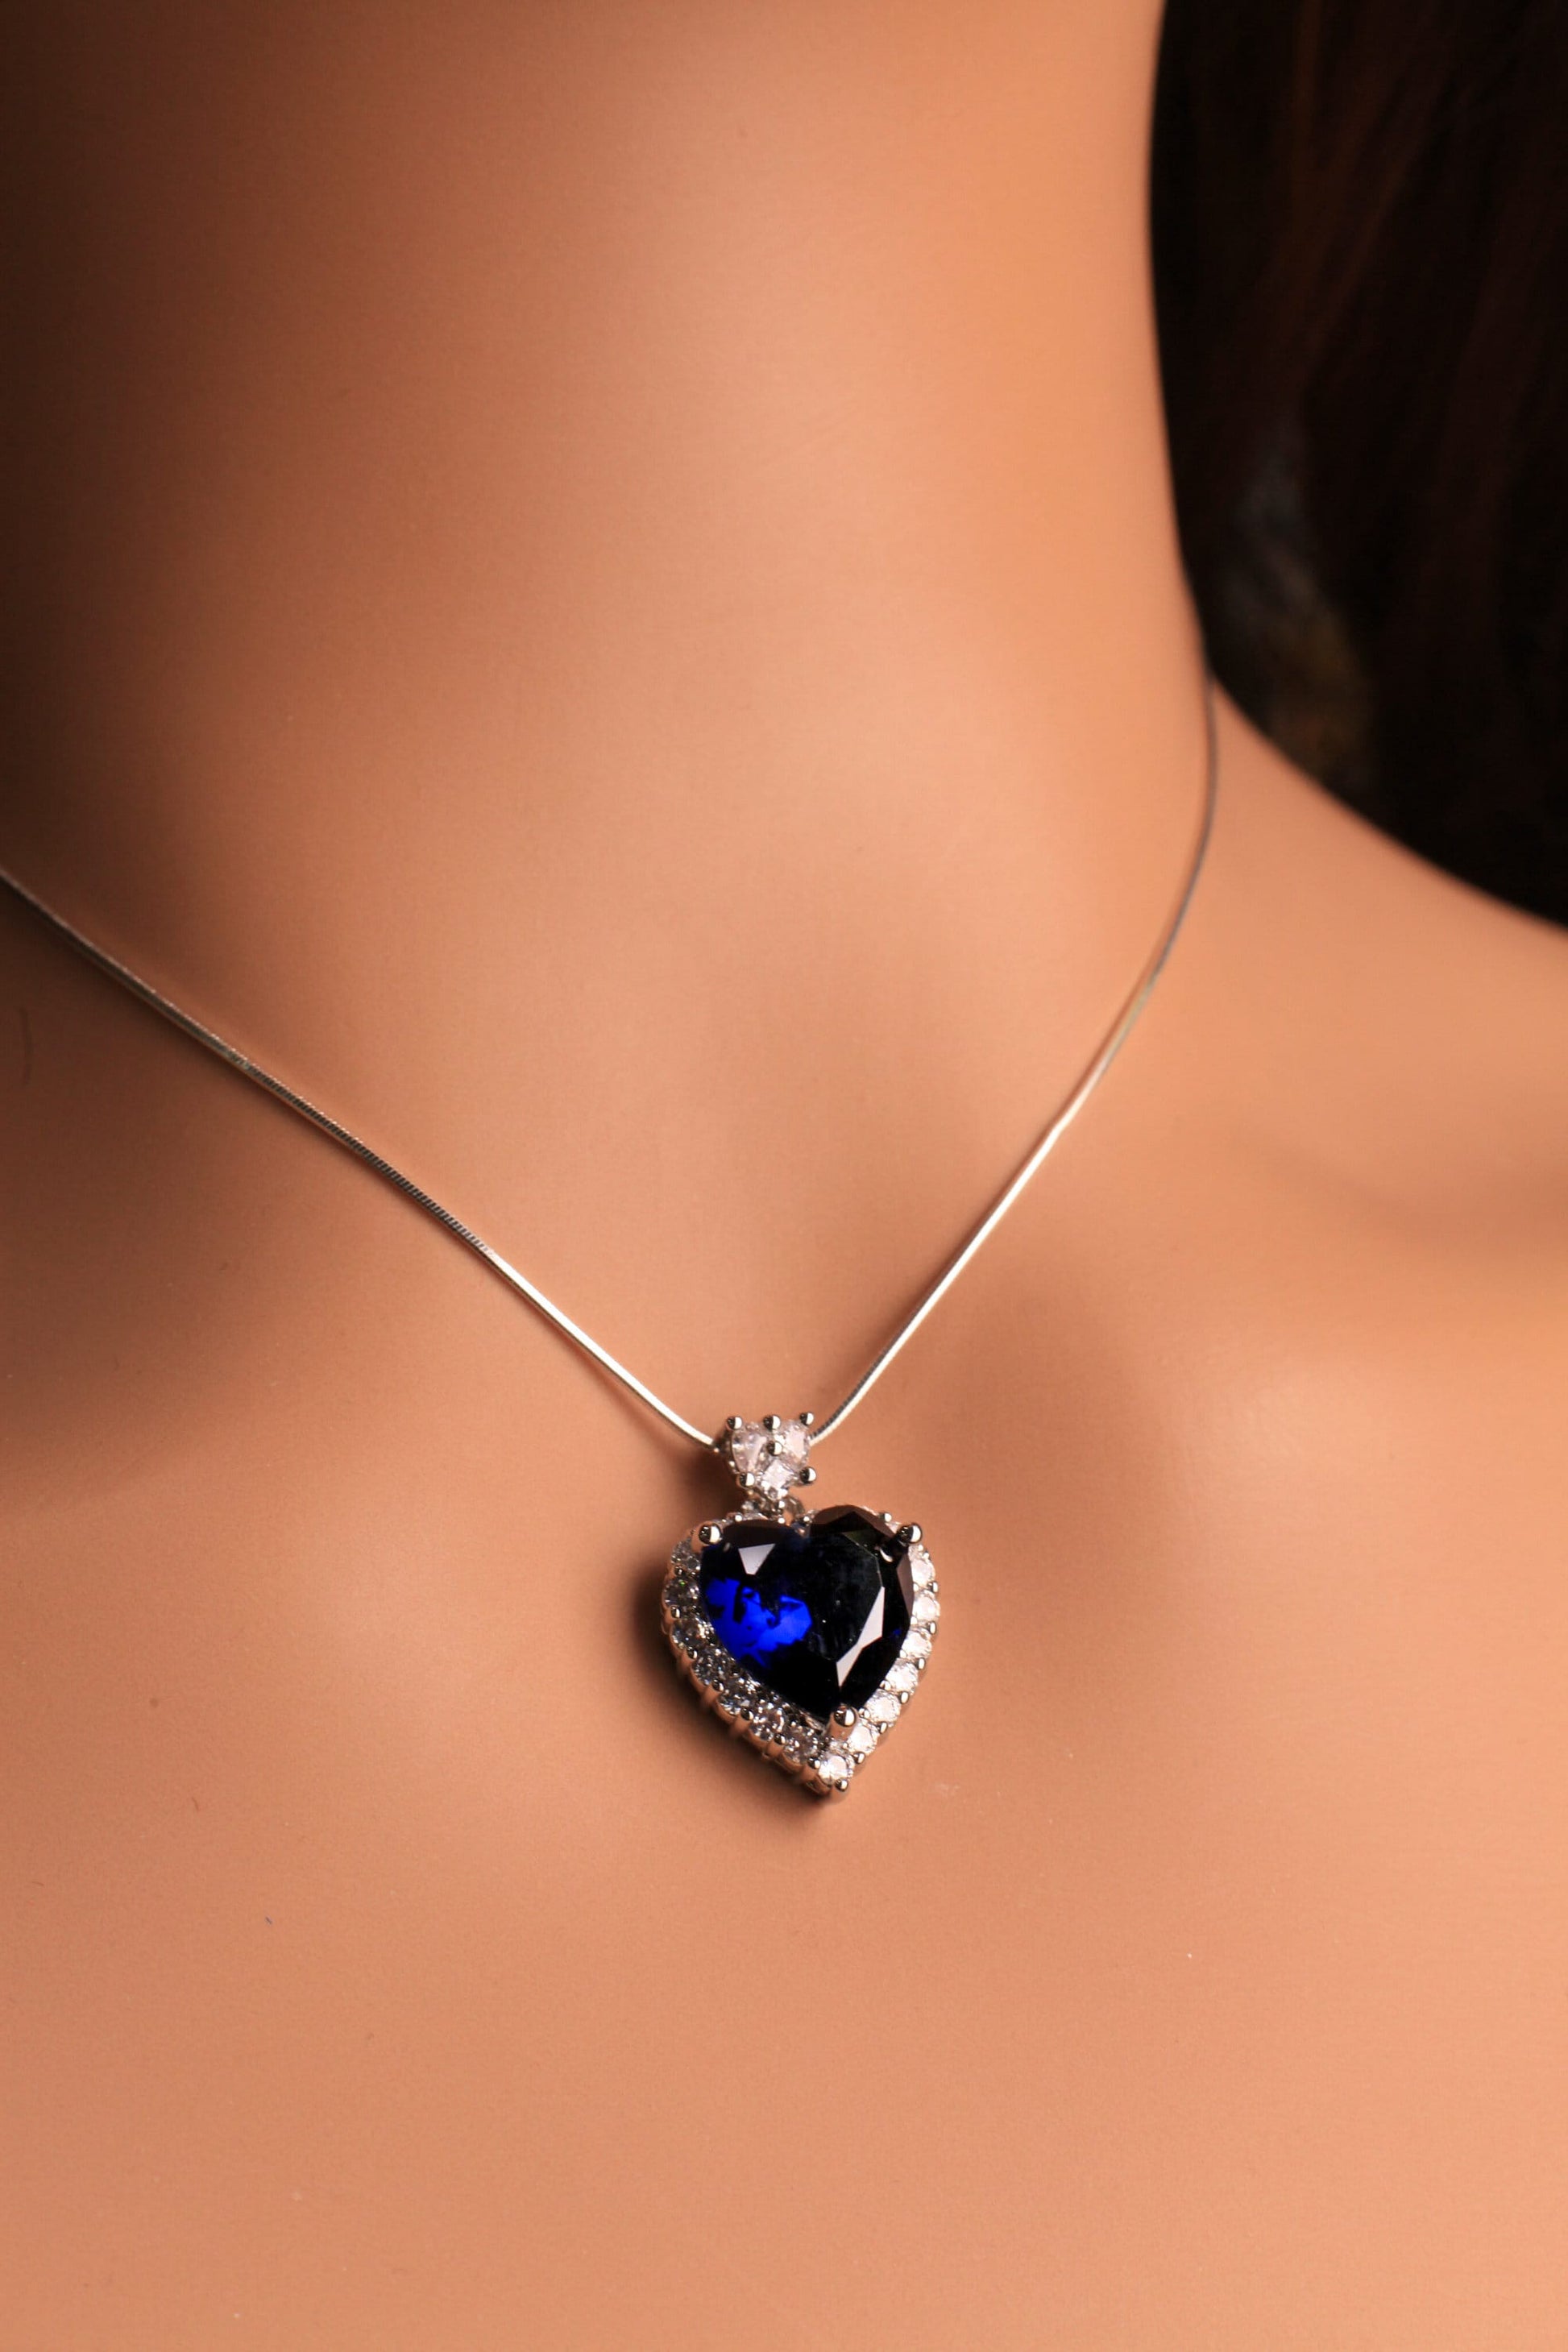 Blue Sapphire CZ diamond setting Ocean of the Heart Pendant 925 Sterling Silver Necklace Italian Sterling Silver snake Chain,Gift